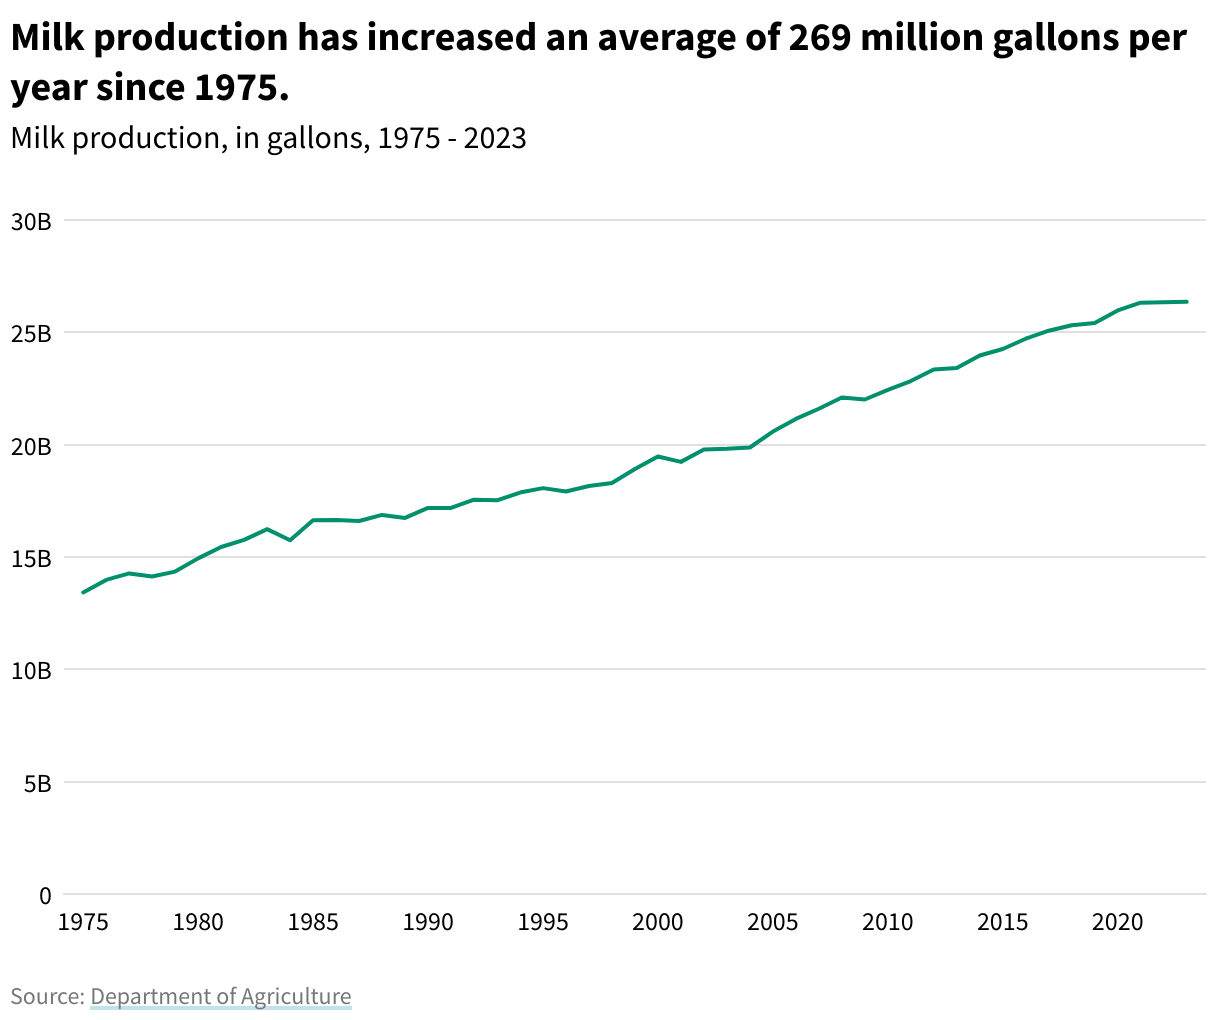 A line chart showing the trend of milk production in gallons from 1975 to 2023.